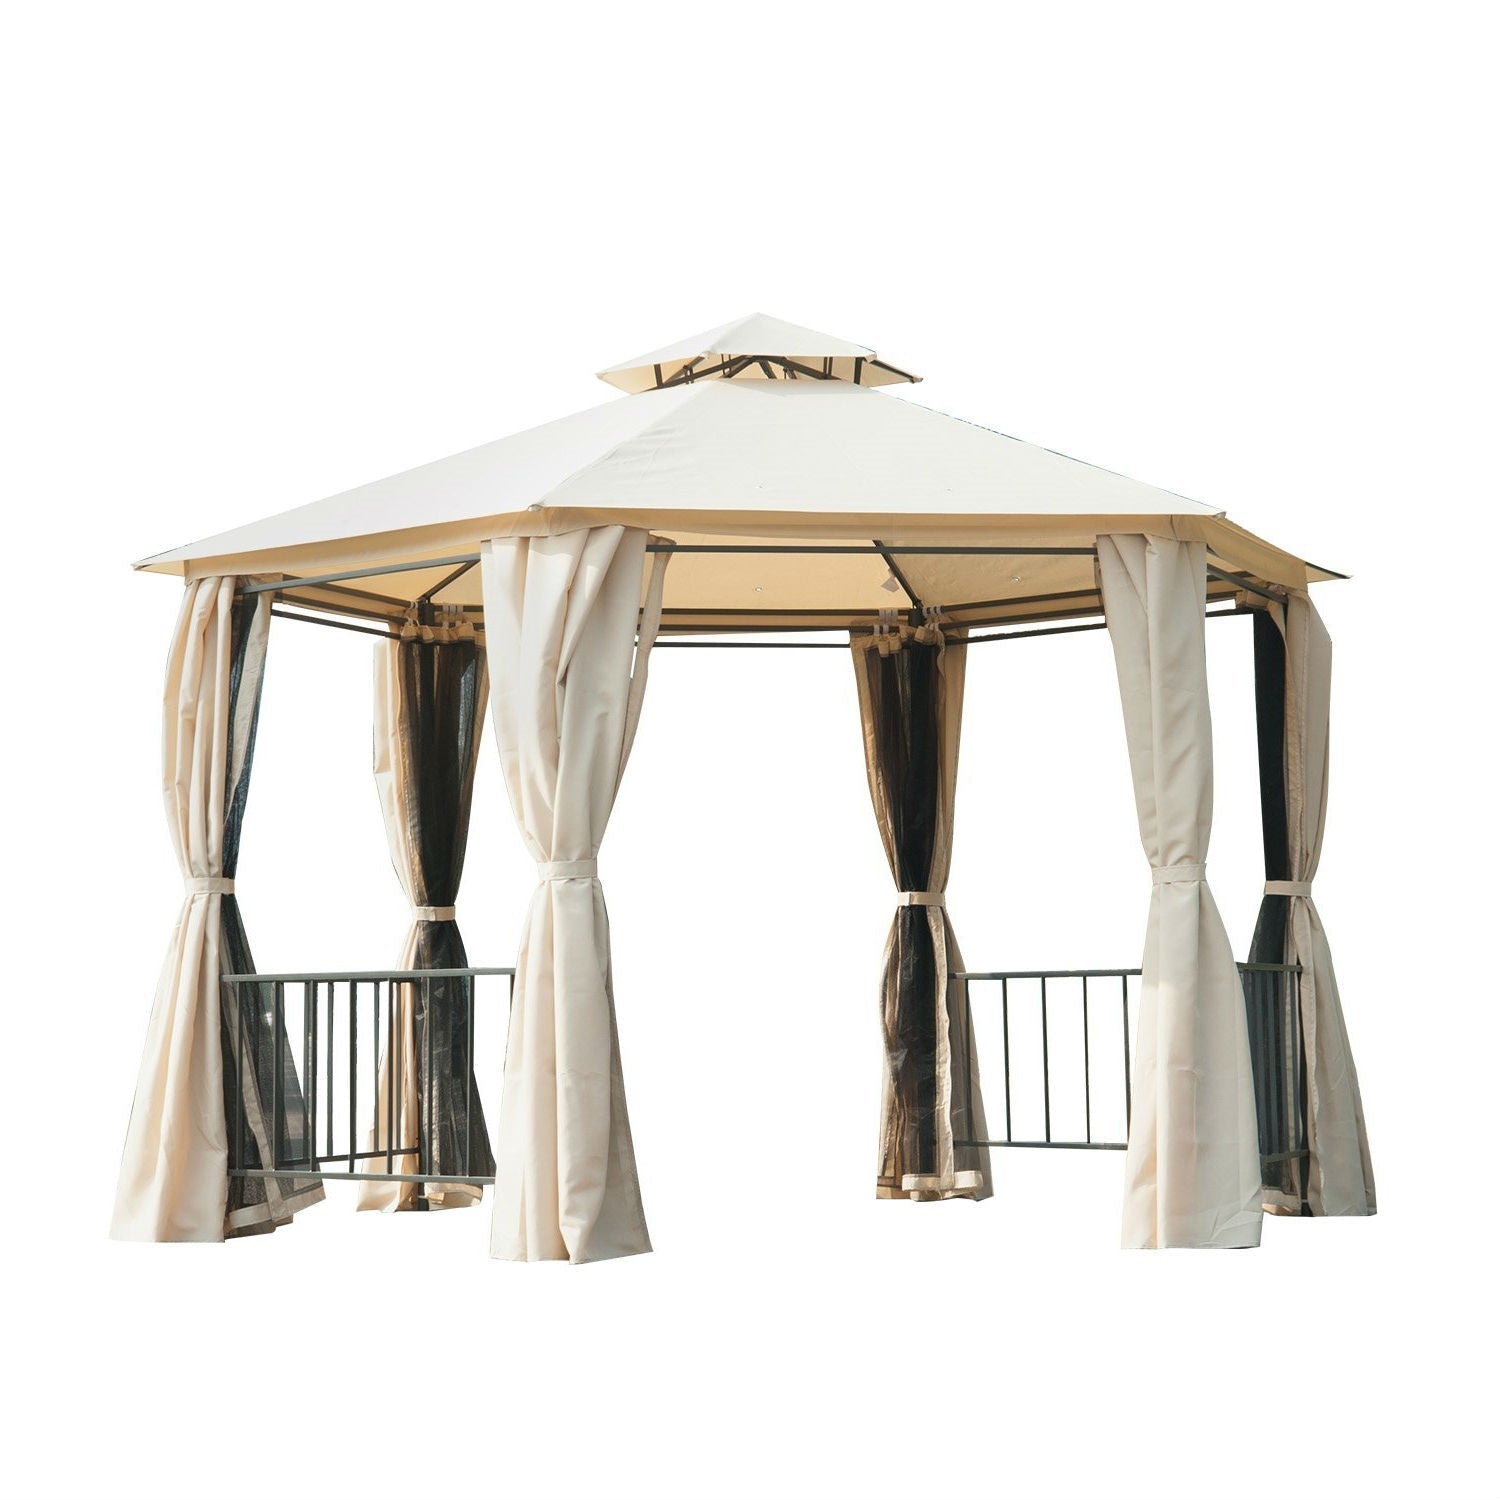 Outdoor > Gazebos & Canopies - Outdoor Patio Hexagon Gazebo With Beige Canopy And Mesh Curtains